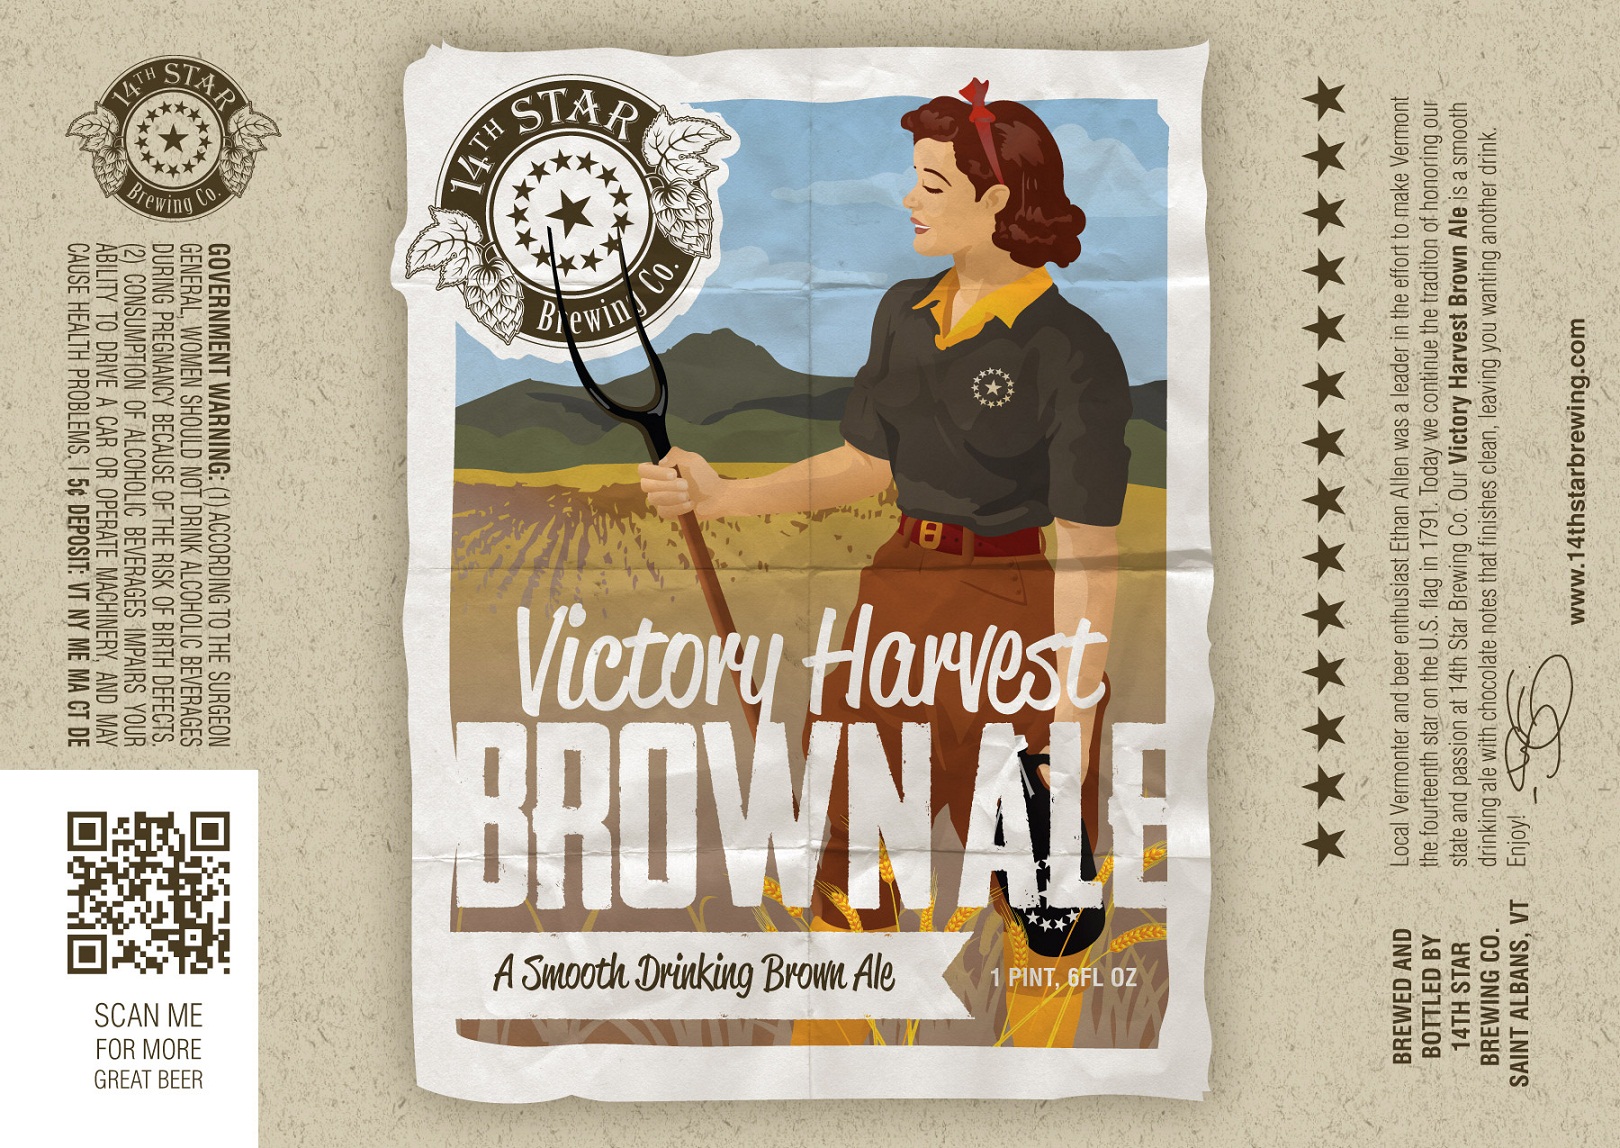 14th Star Brewing Victory Harvest Brown Ale